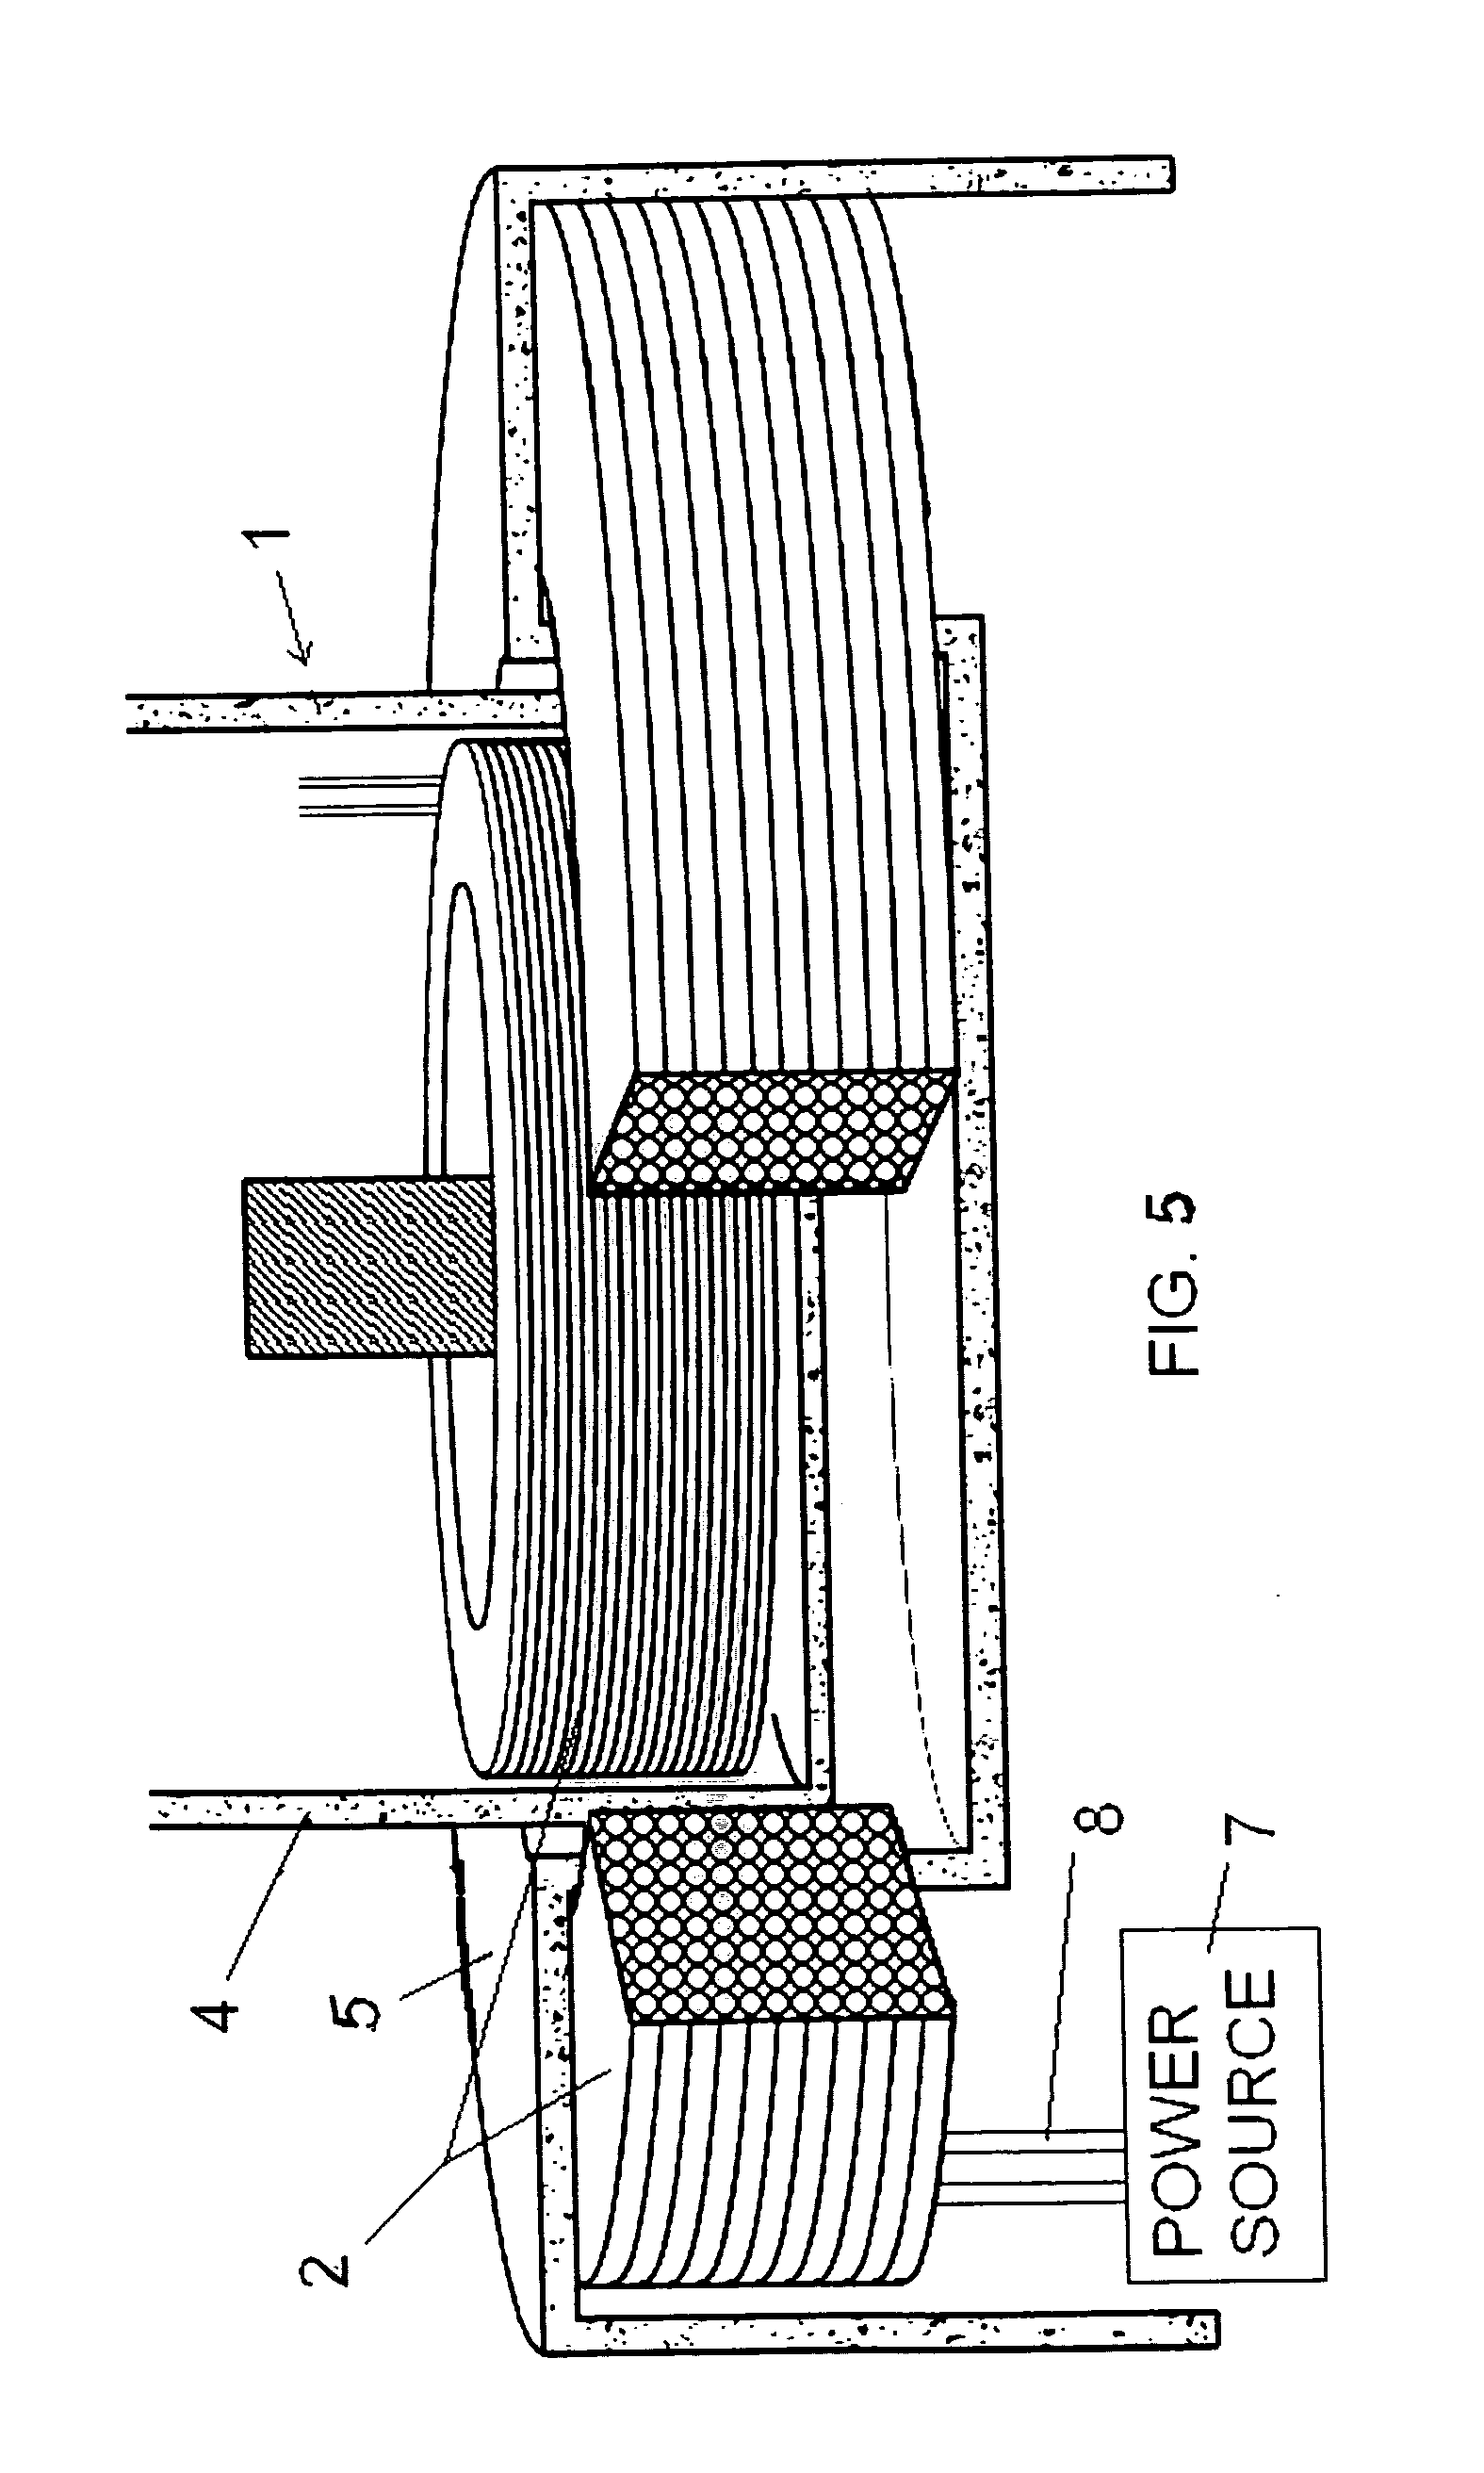 Bi-directional rechargeable/replaceable induction power pack and method